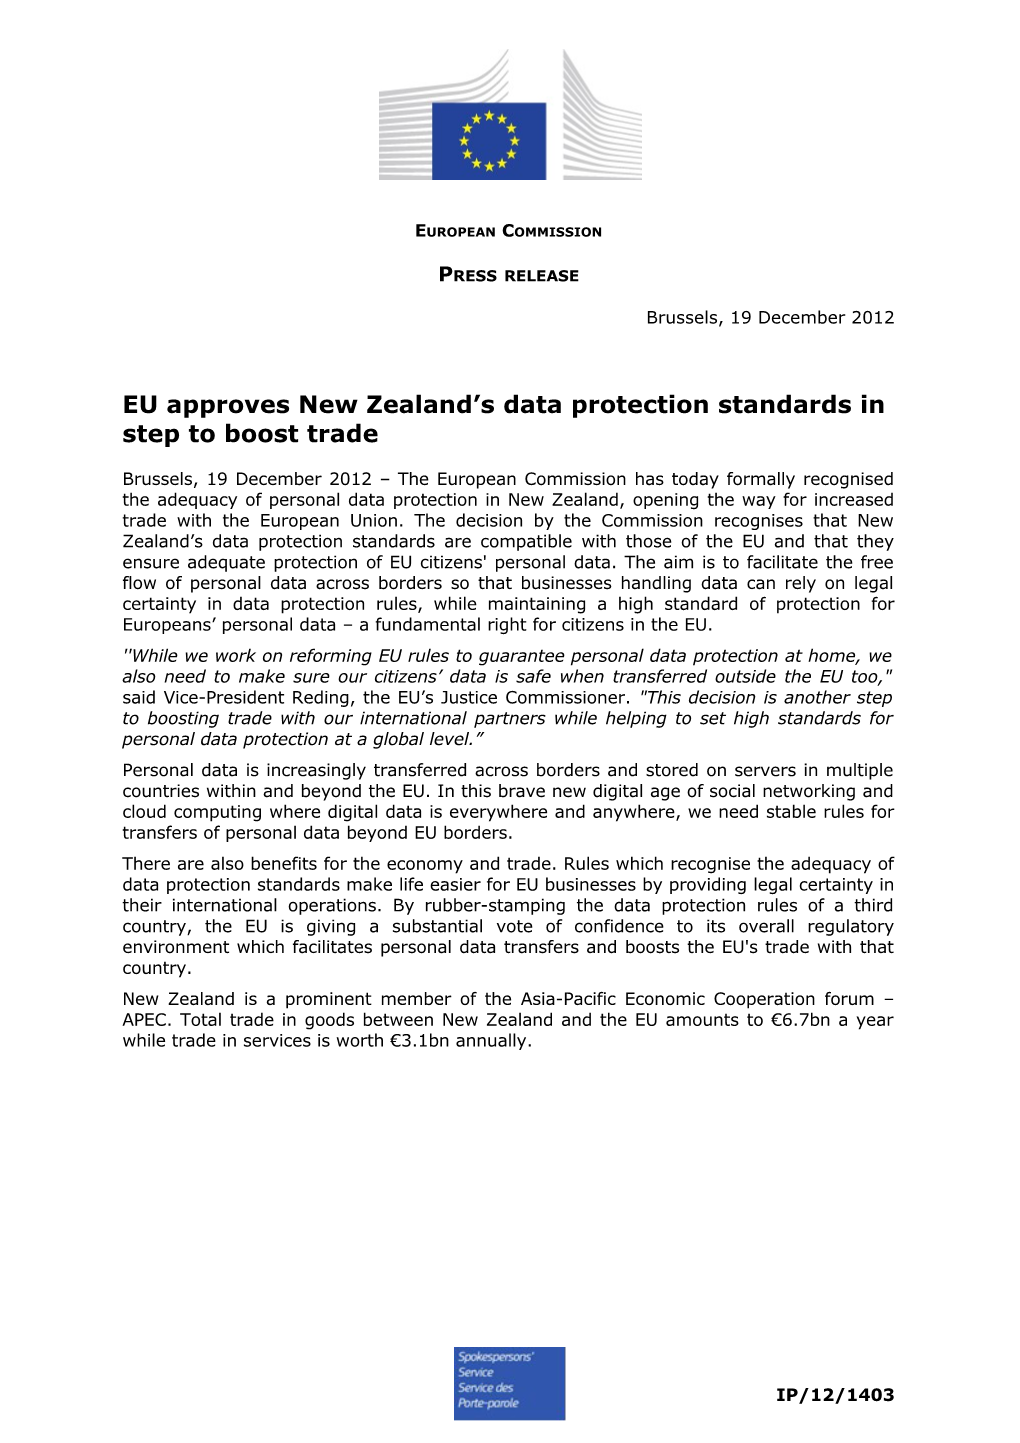 EU Approves New Zealand S Data Protection Standards in Step to Boost Trade